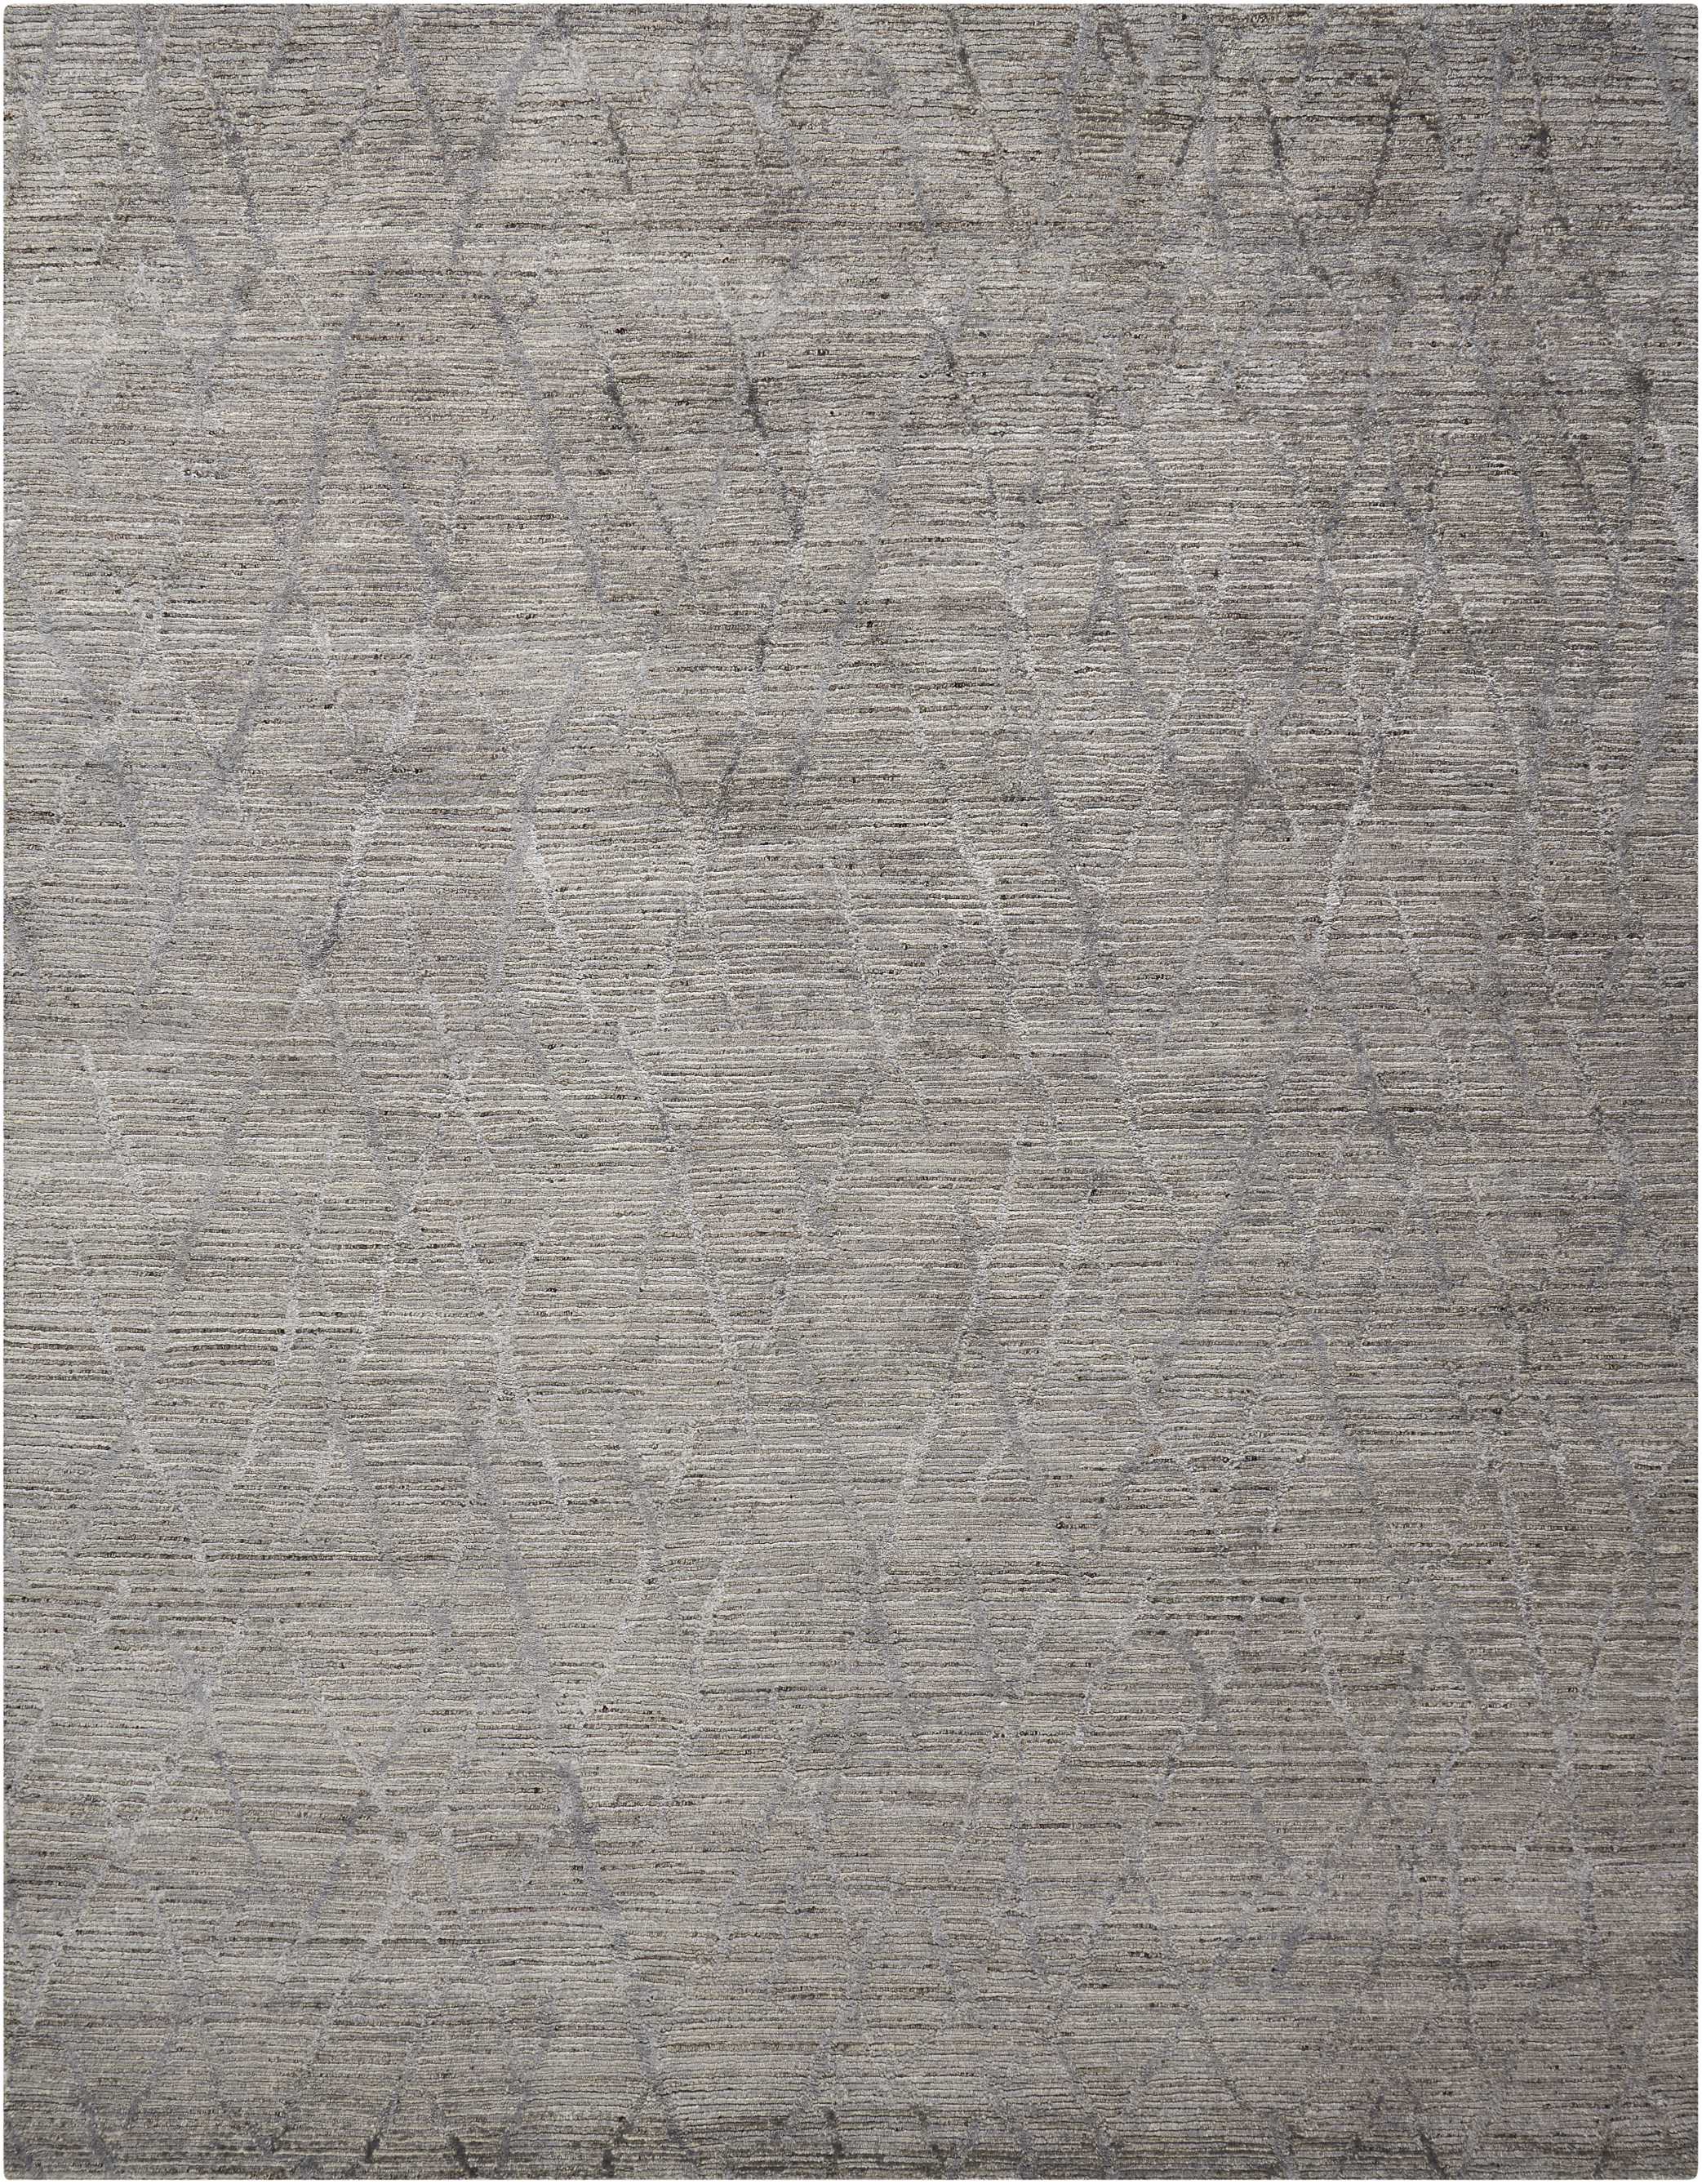 Abstract, textured surface with subtle patterns evoke modern elegance.